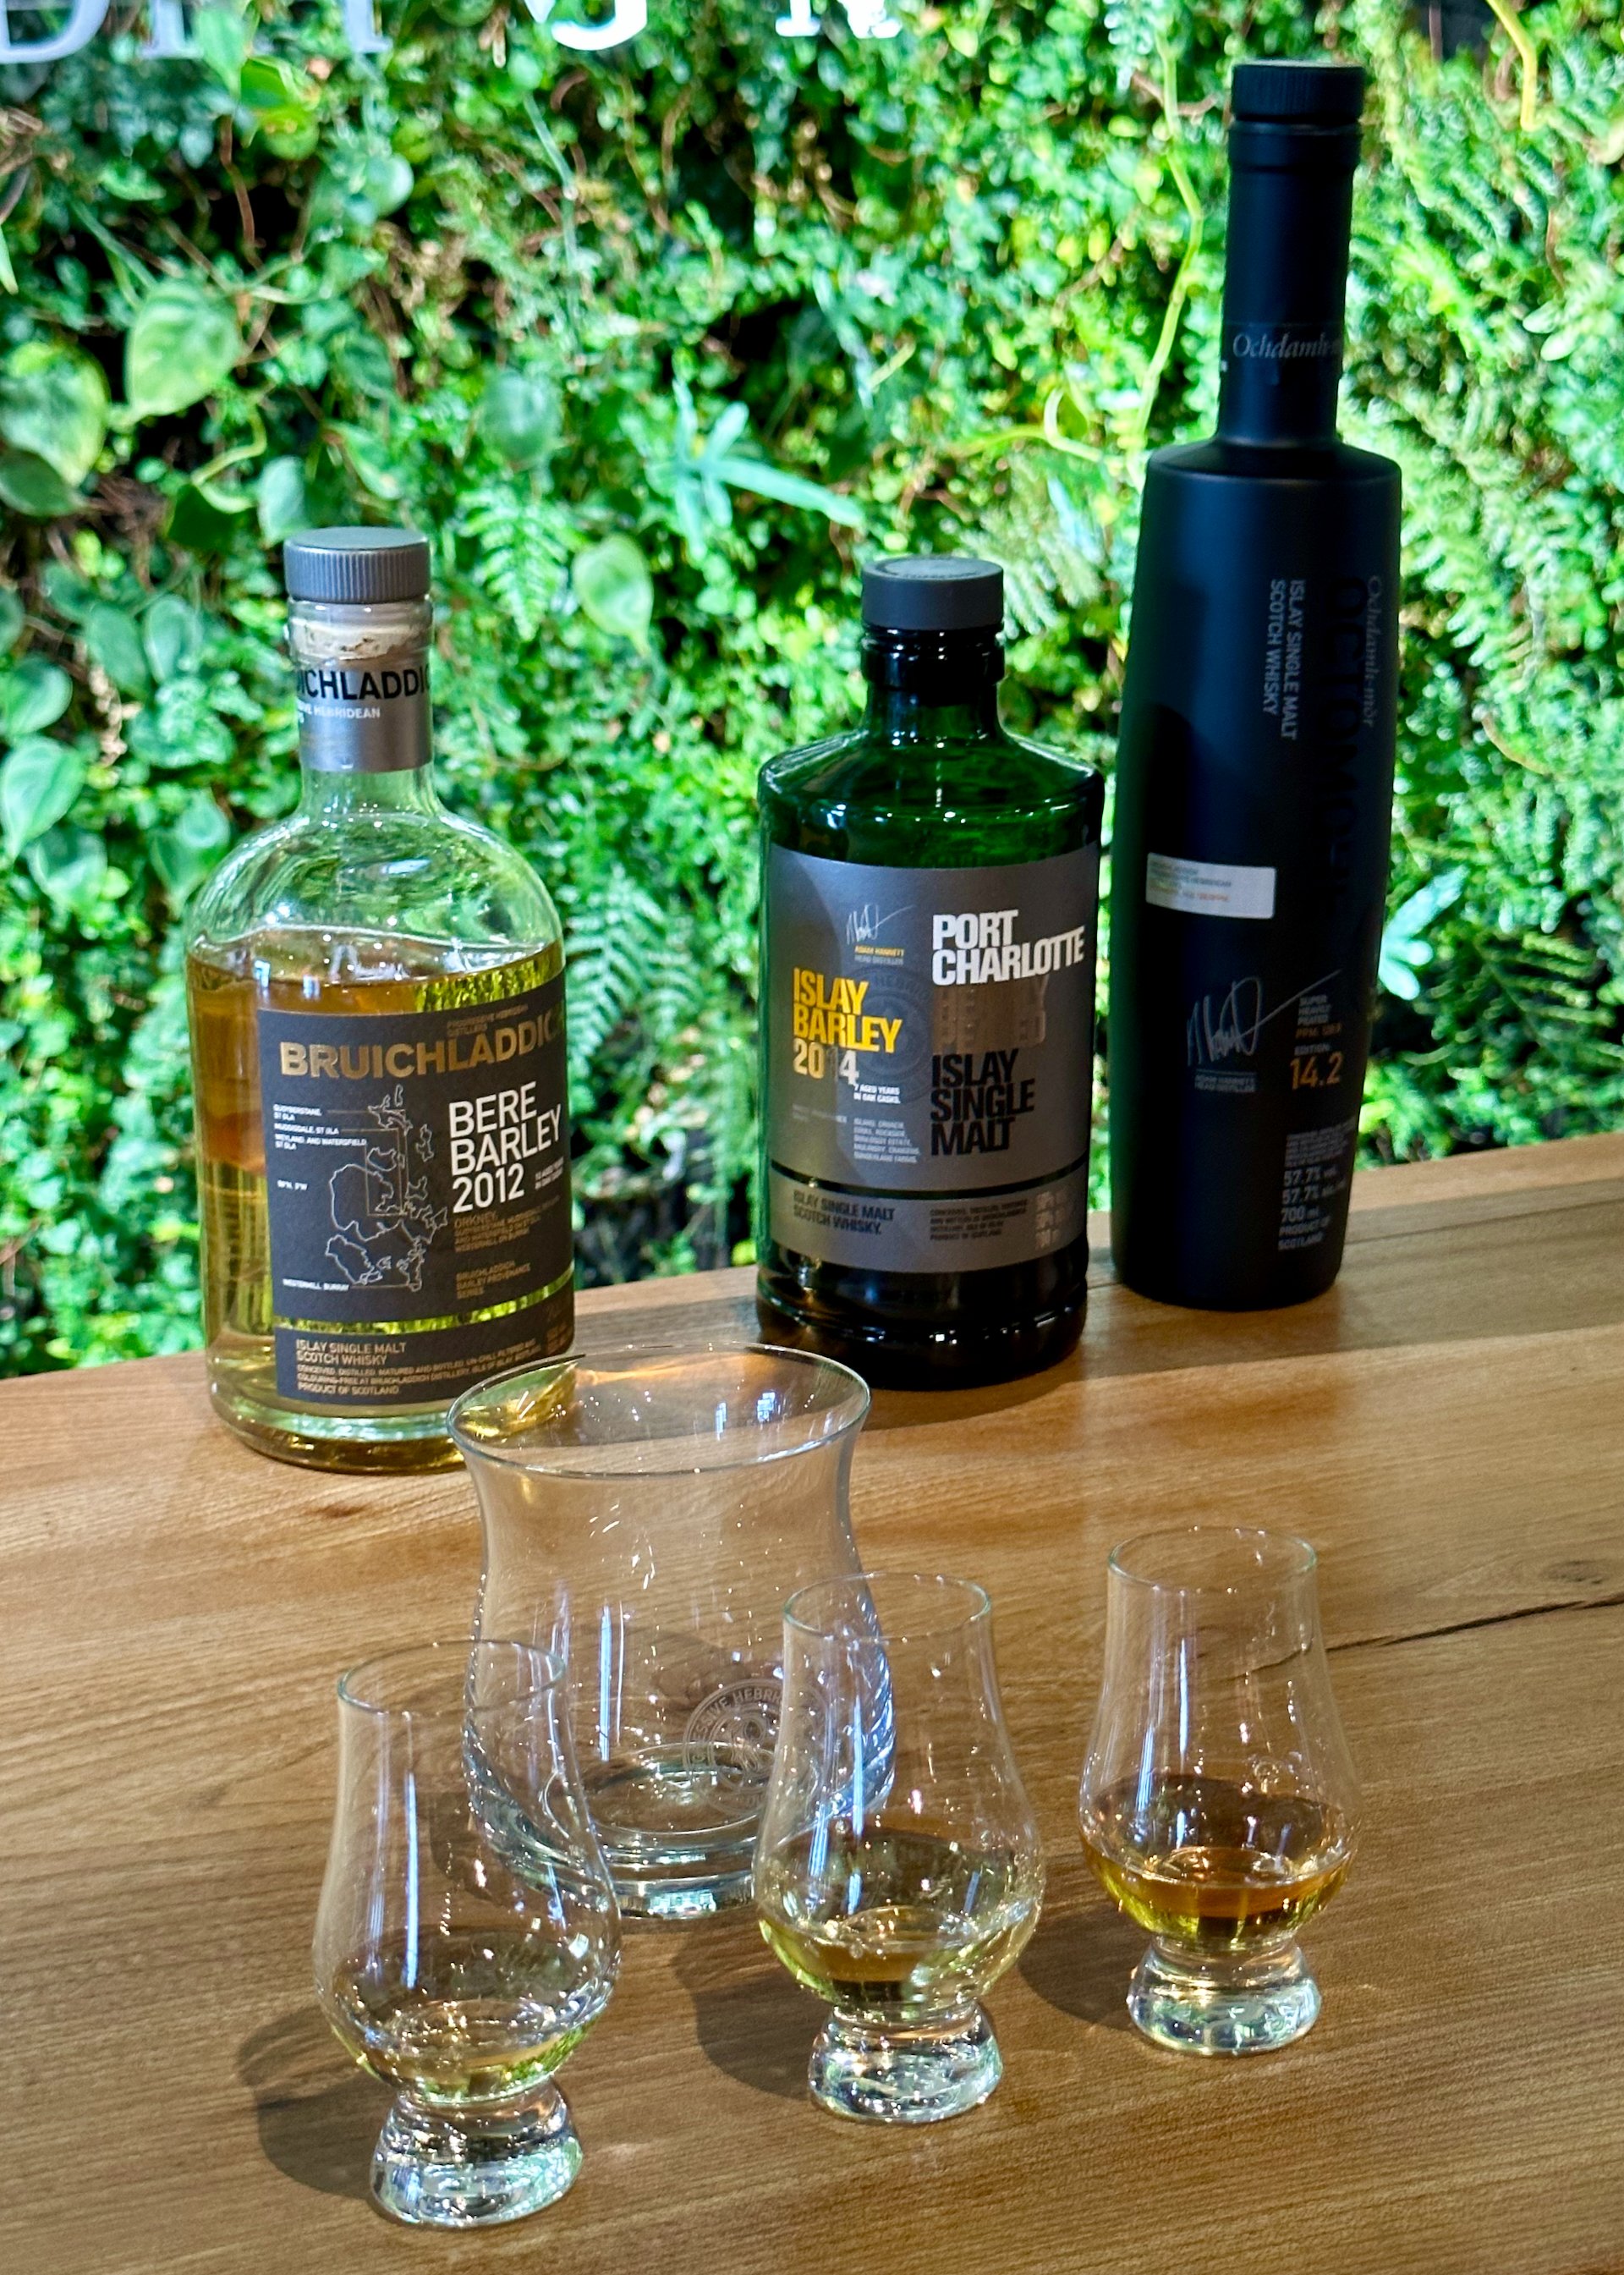  The three scotches we sampled, including the Octomore (tall skinny bottle) - the “peatiest scotch on earth” 